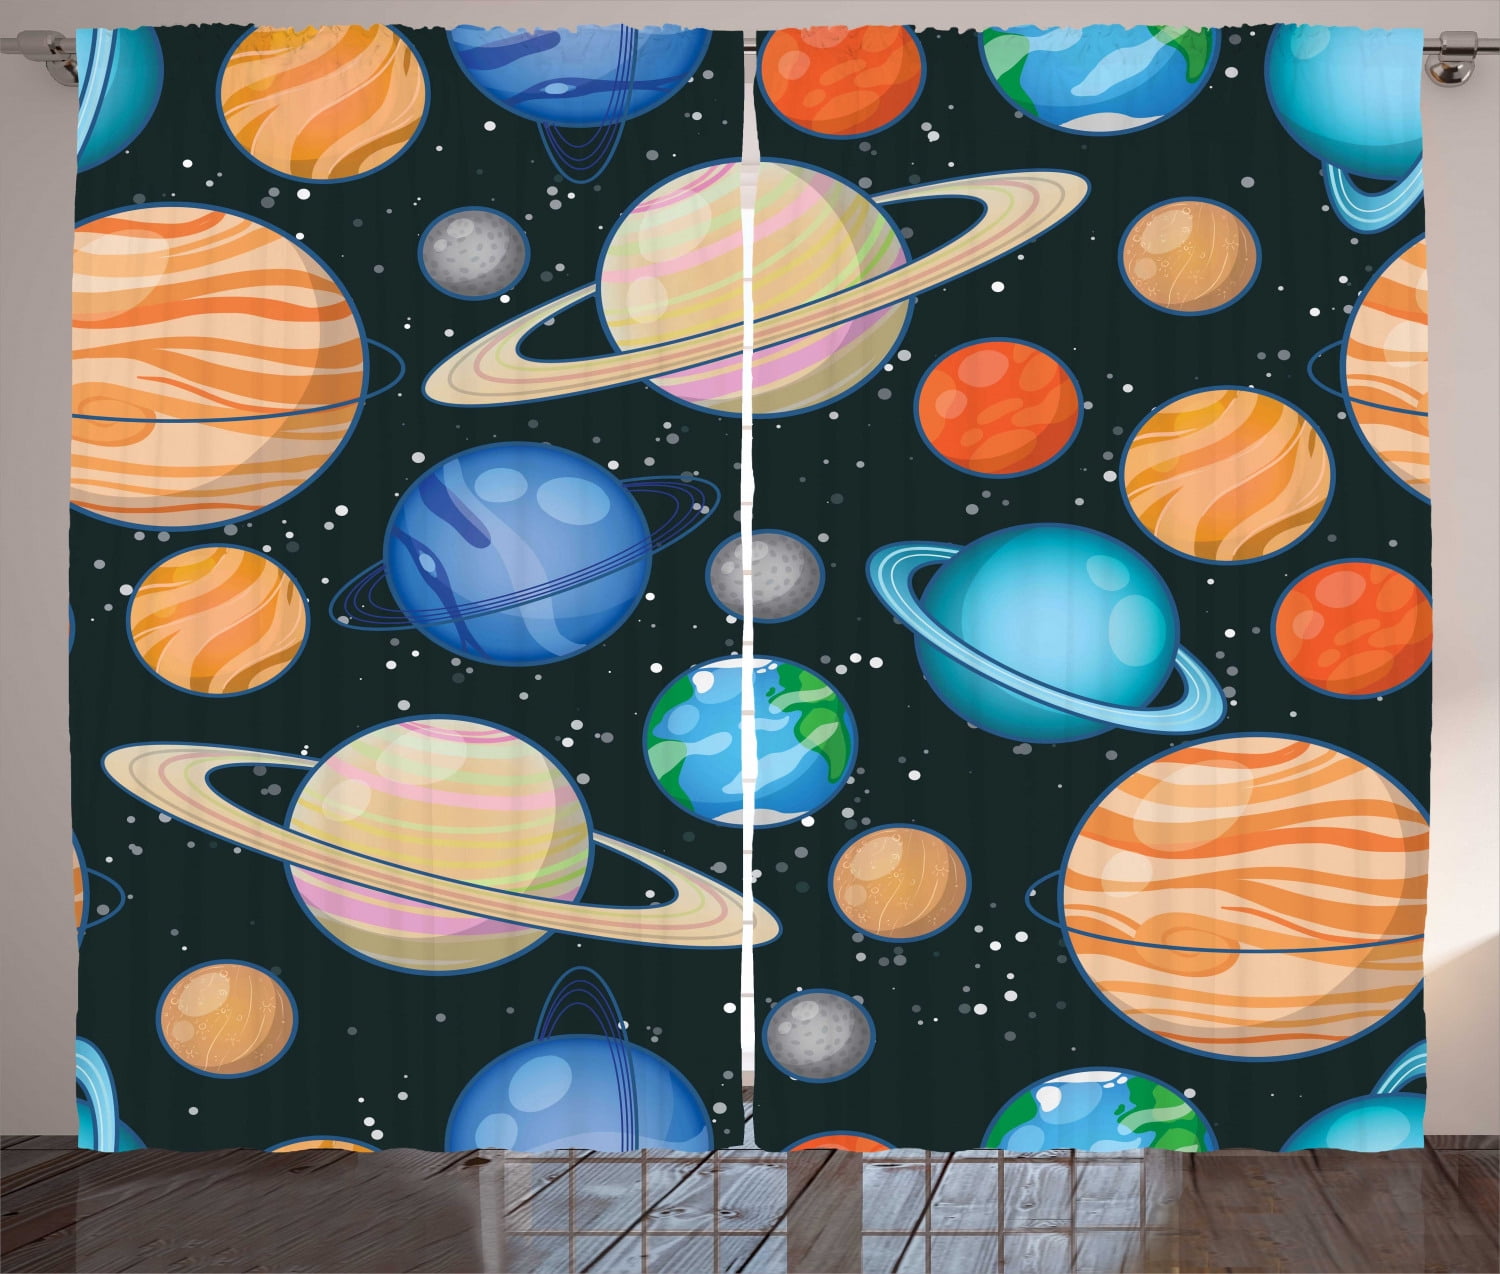 SOLAR SYSTEM SPACE PLANETS SINGLE DOUBLE JUNIOR DUVET COVERS MATCHING CURTAINS 